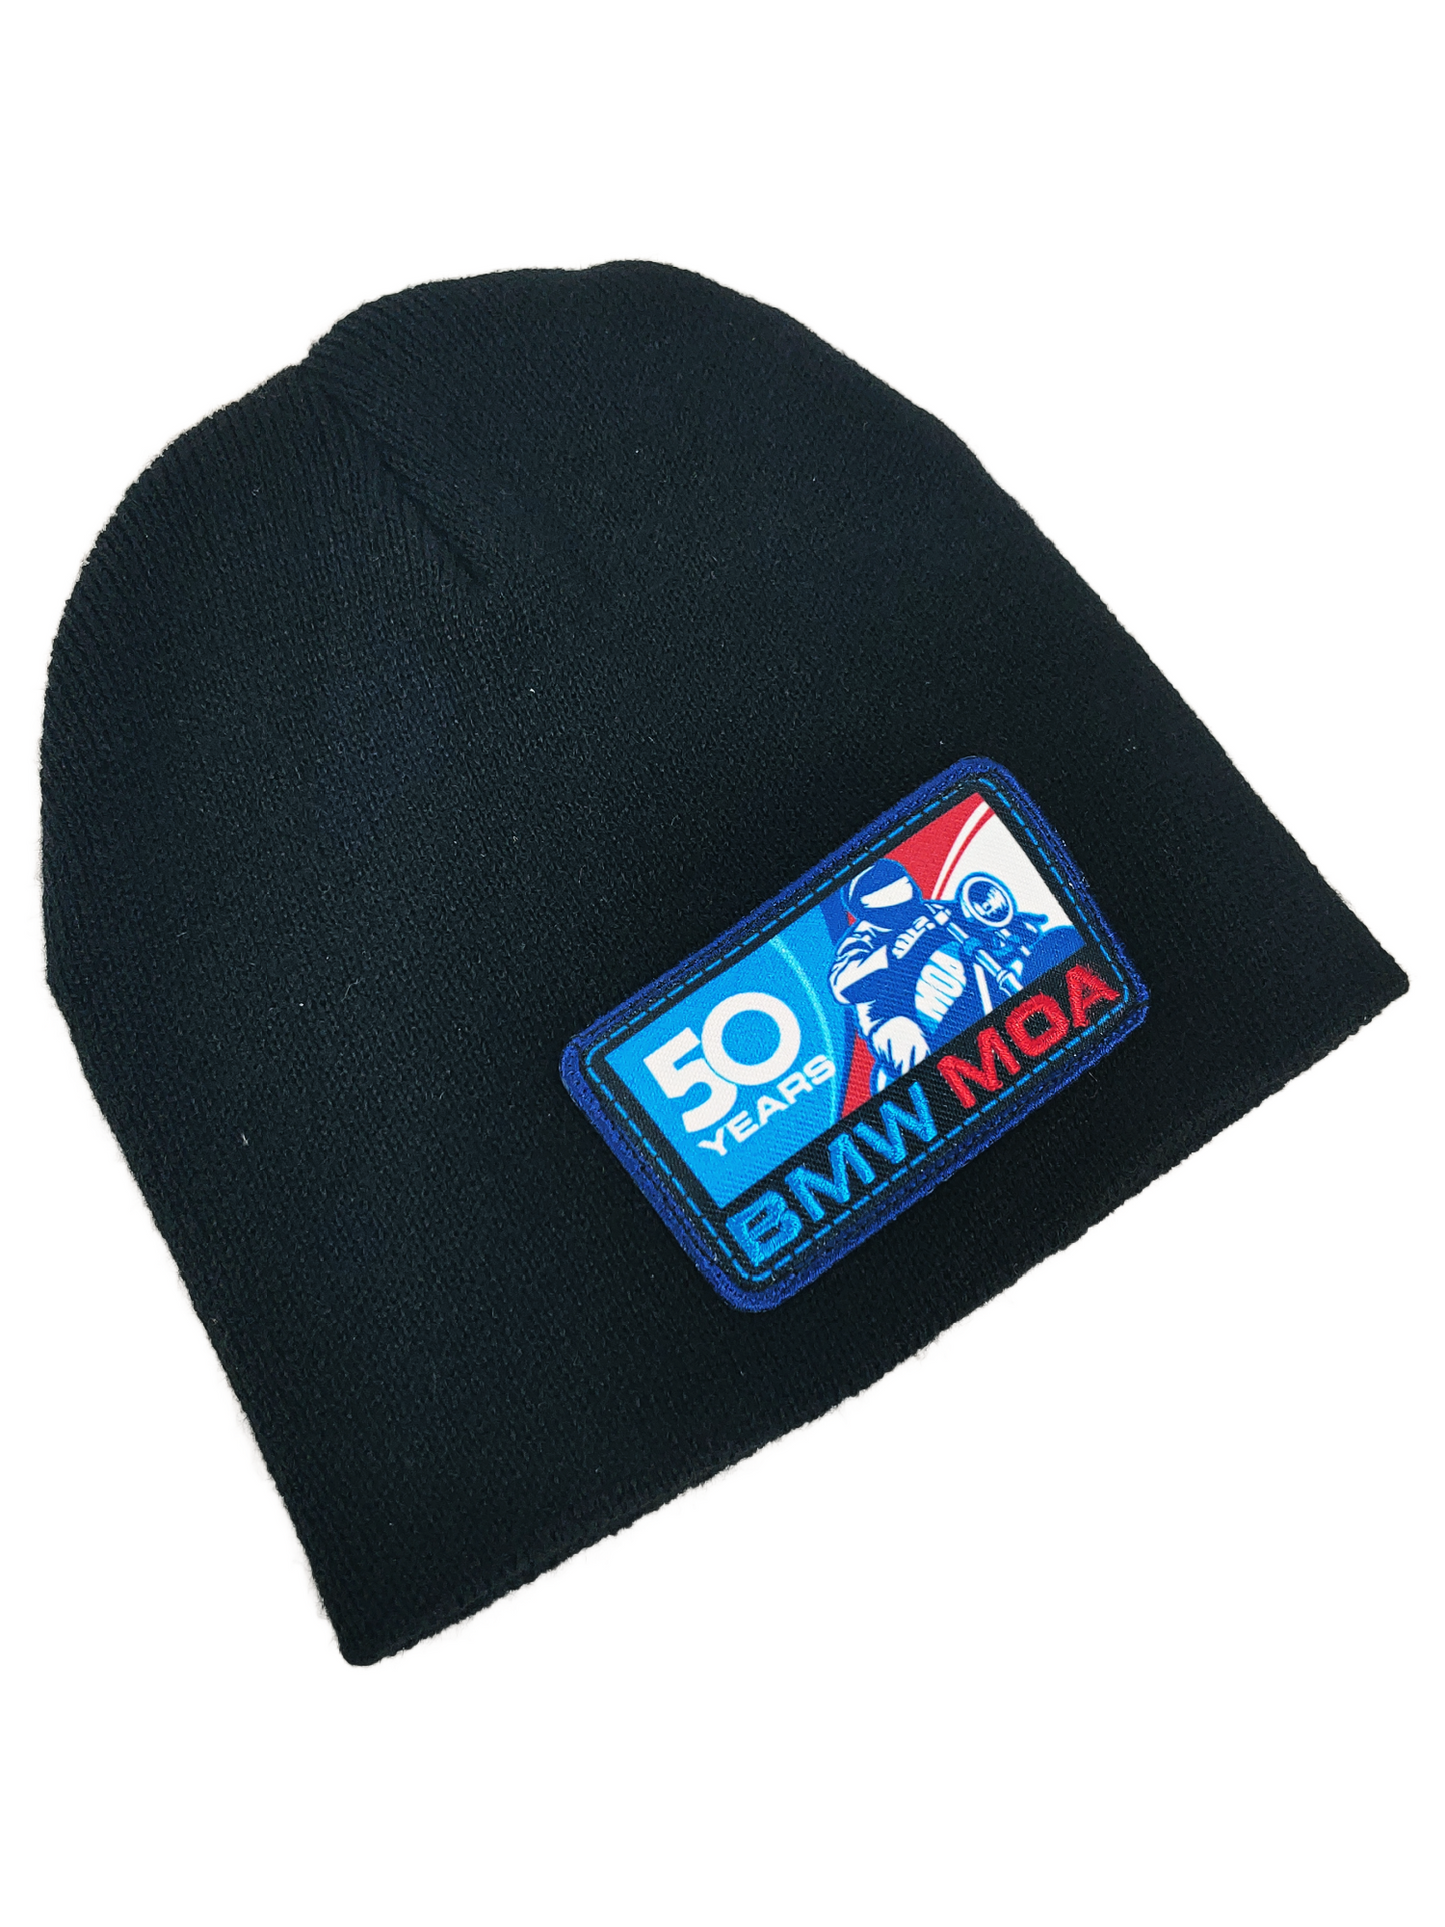 50th Anniversary - Limited Edition Beanies